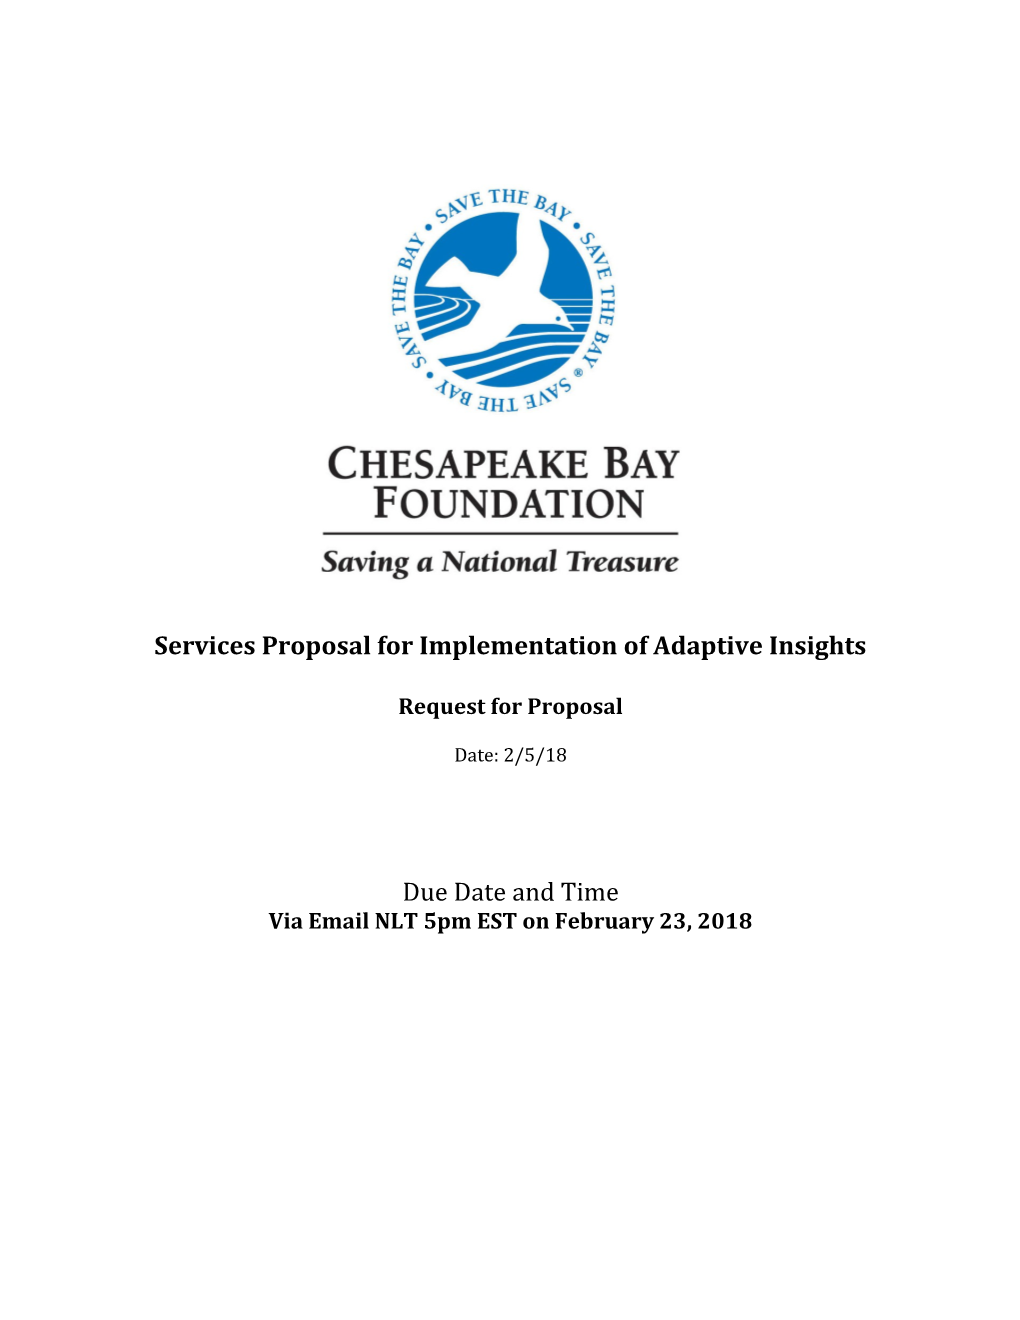 Services Proposal for Implementation of Adaptive Insights